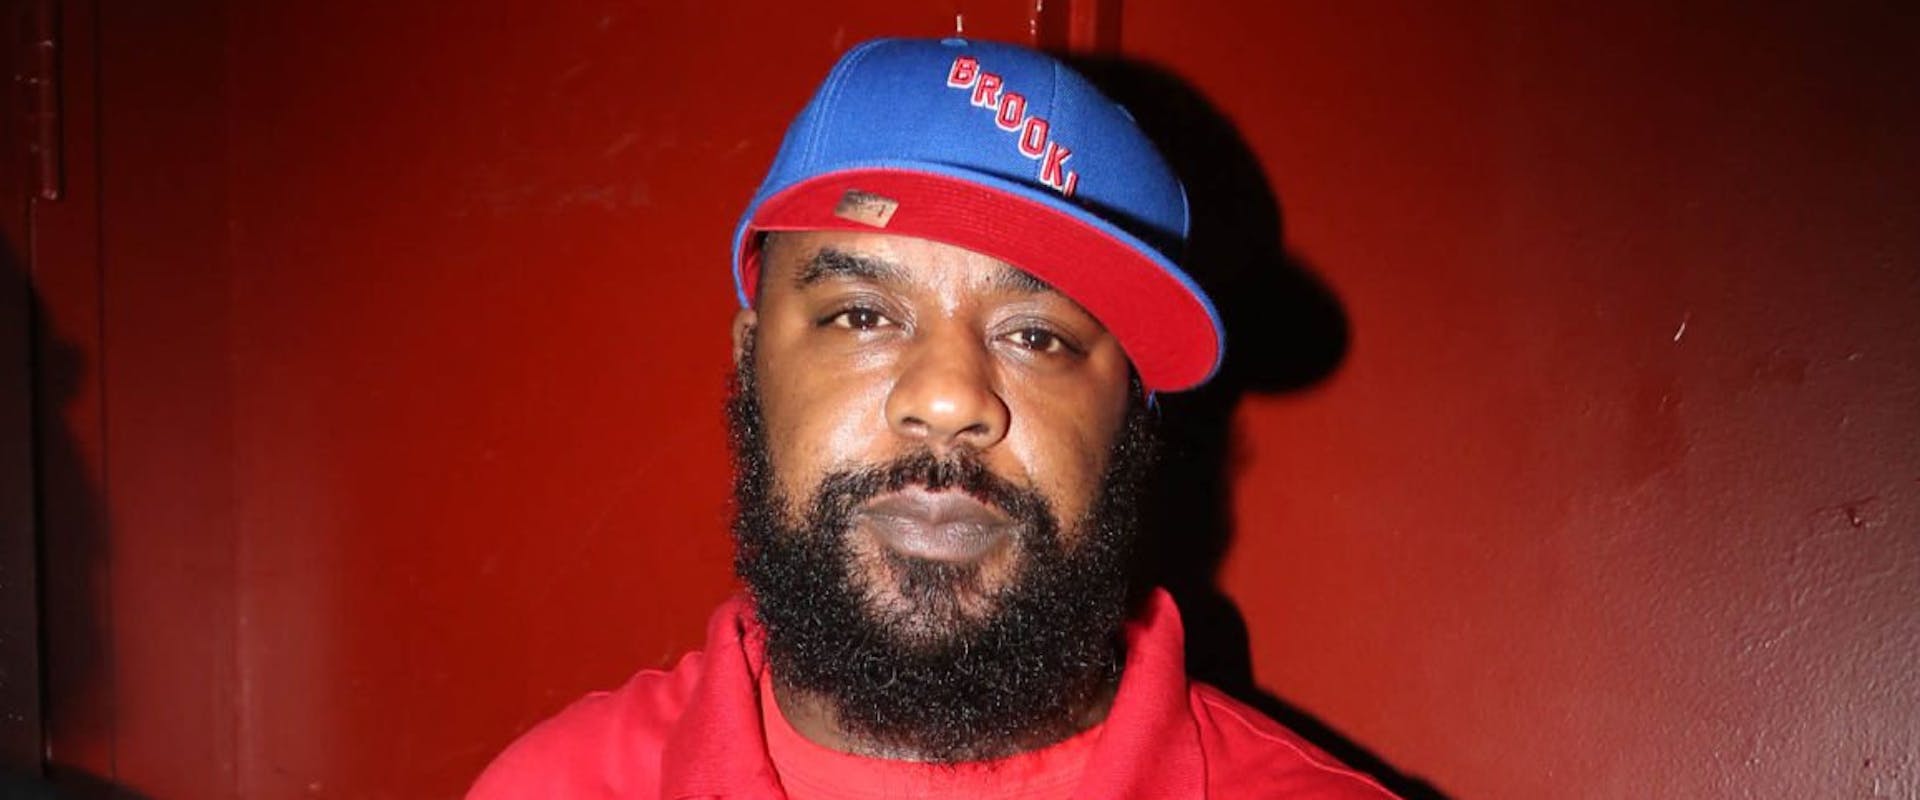 Sean Price attends at SOB's on June 18, 2013 in New York City. (Photo by Johnny Nunez/WireImage)